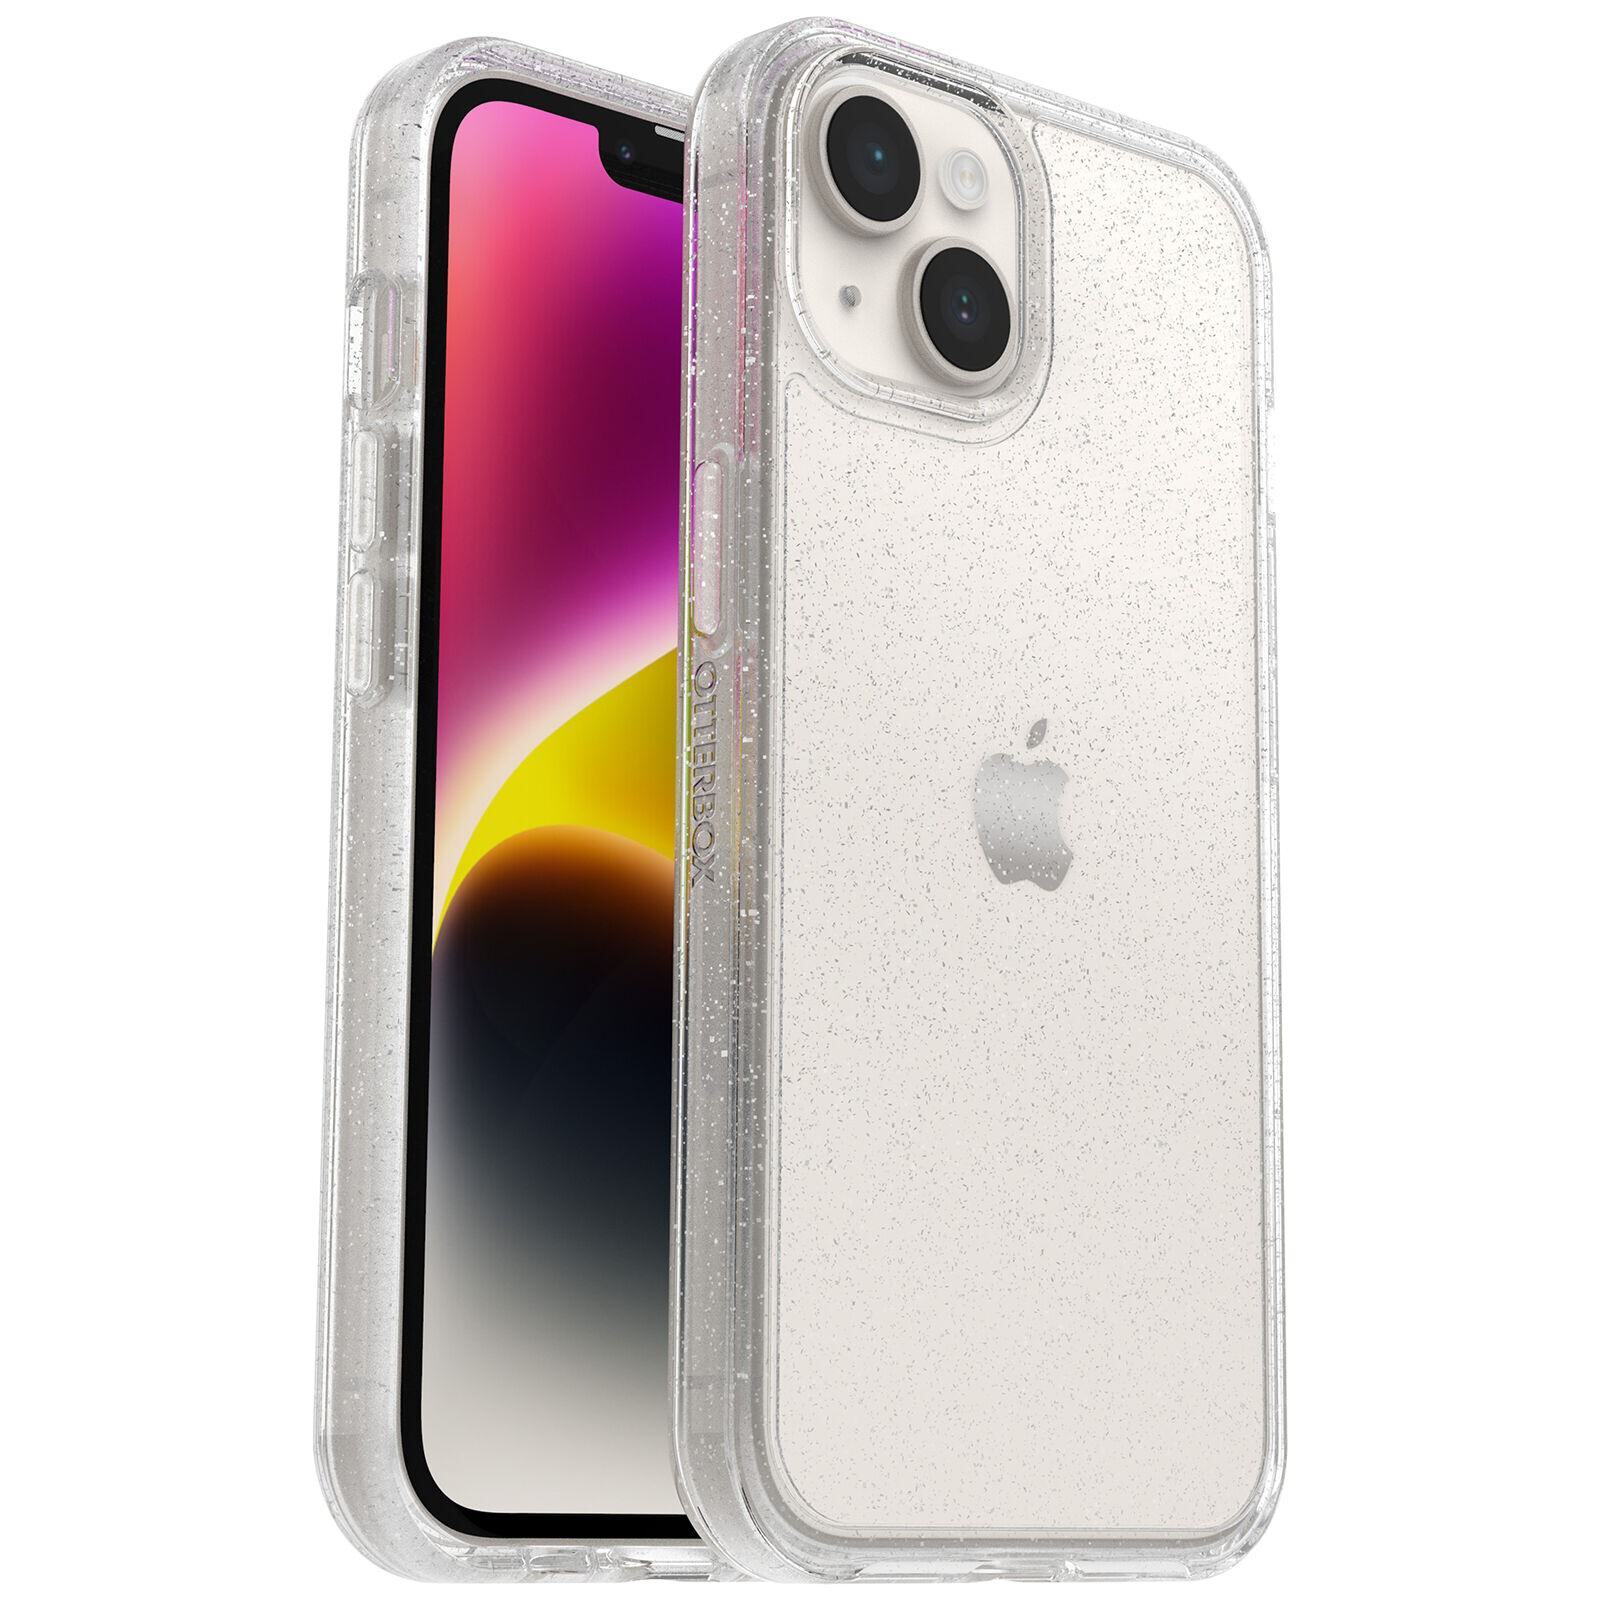 OtterBox Symmetry Series Clear Case for iPhone 11 (Clear) 77-62474